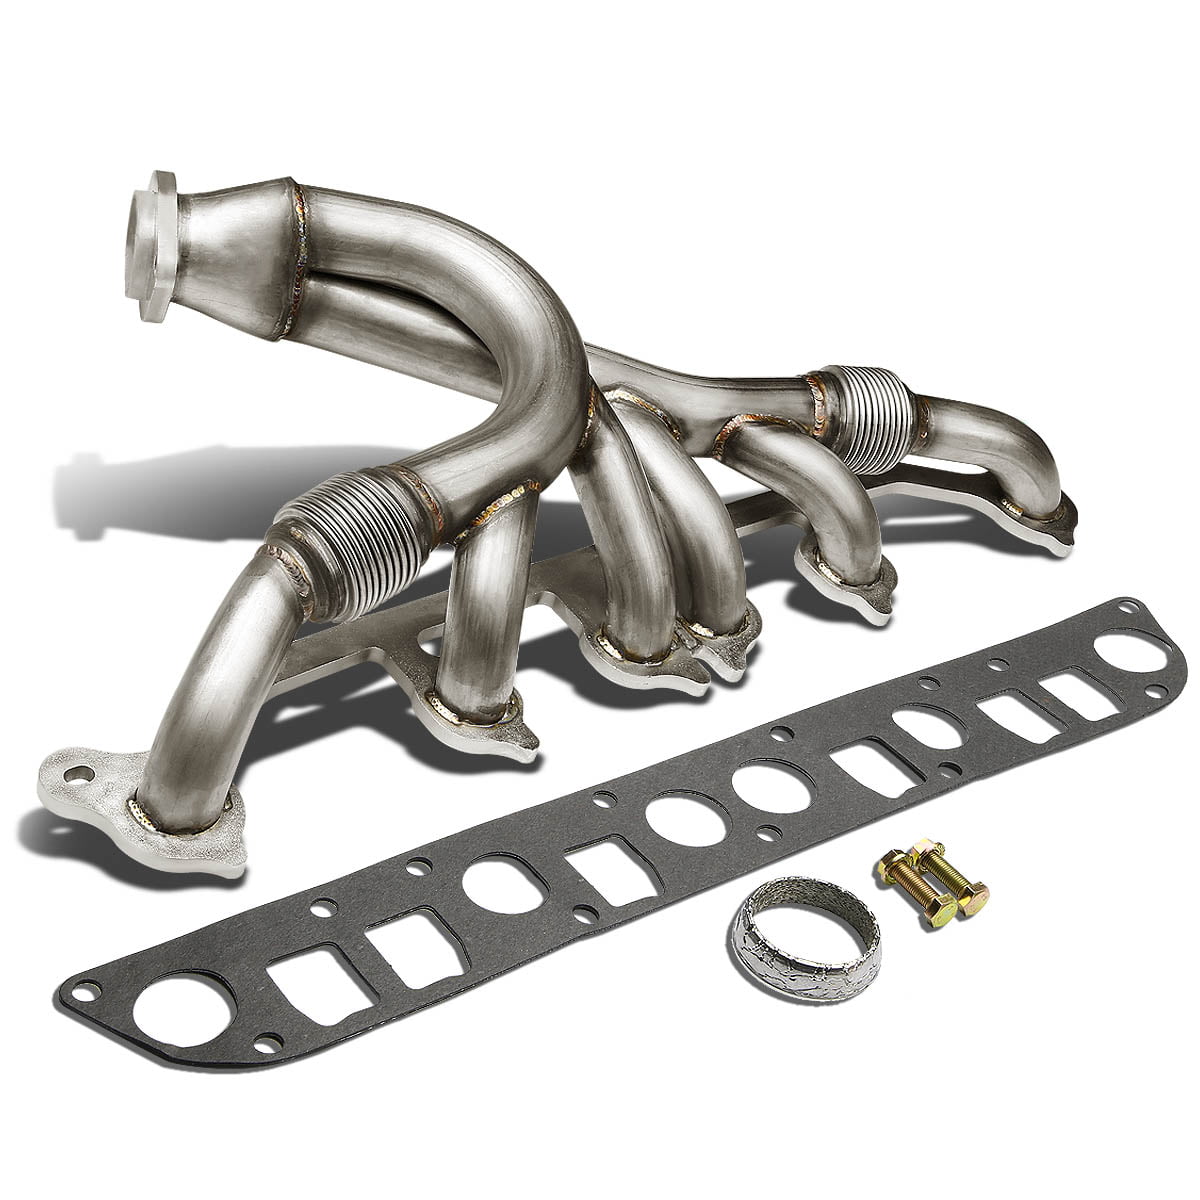 For 1991 to 1999 Jeep Wrangler/Cherokee 4.0 Stainless